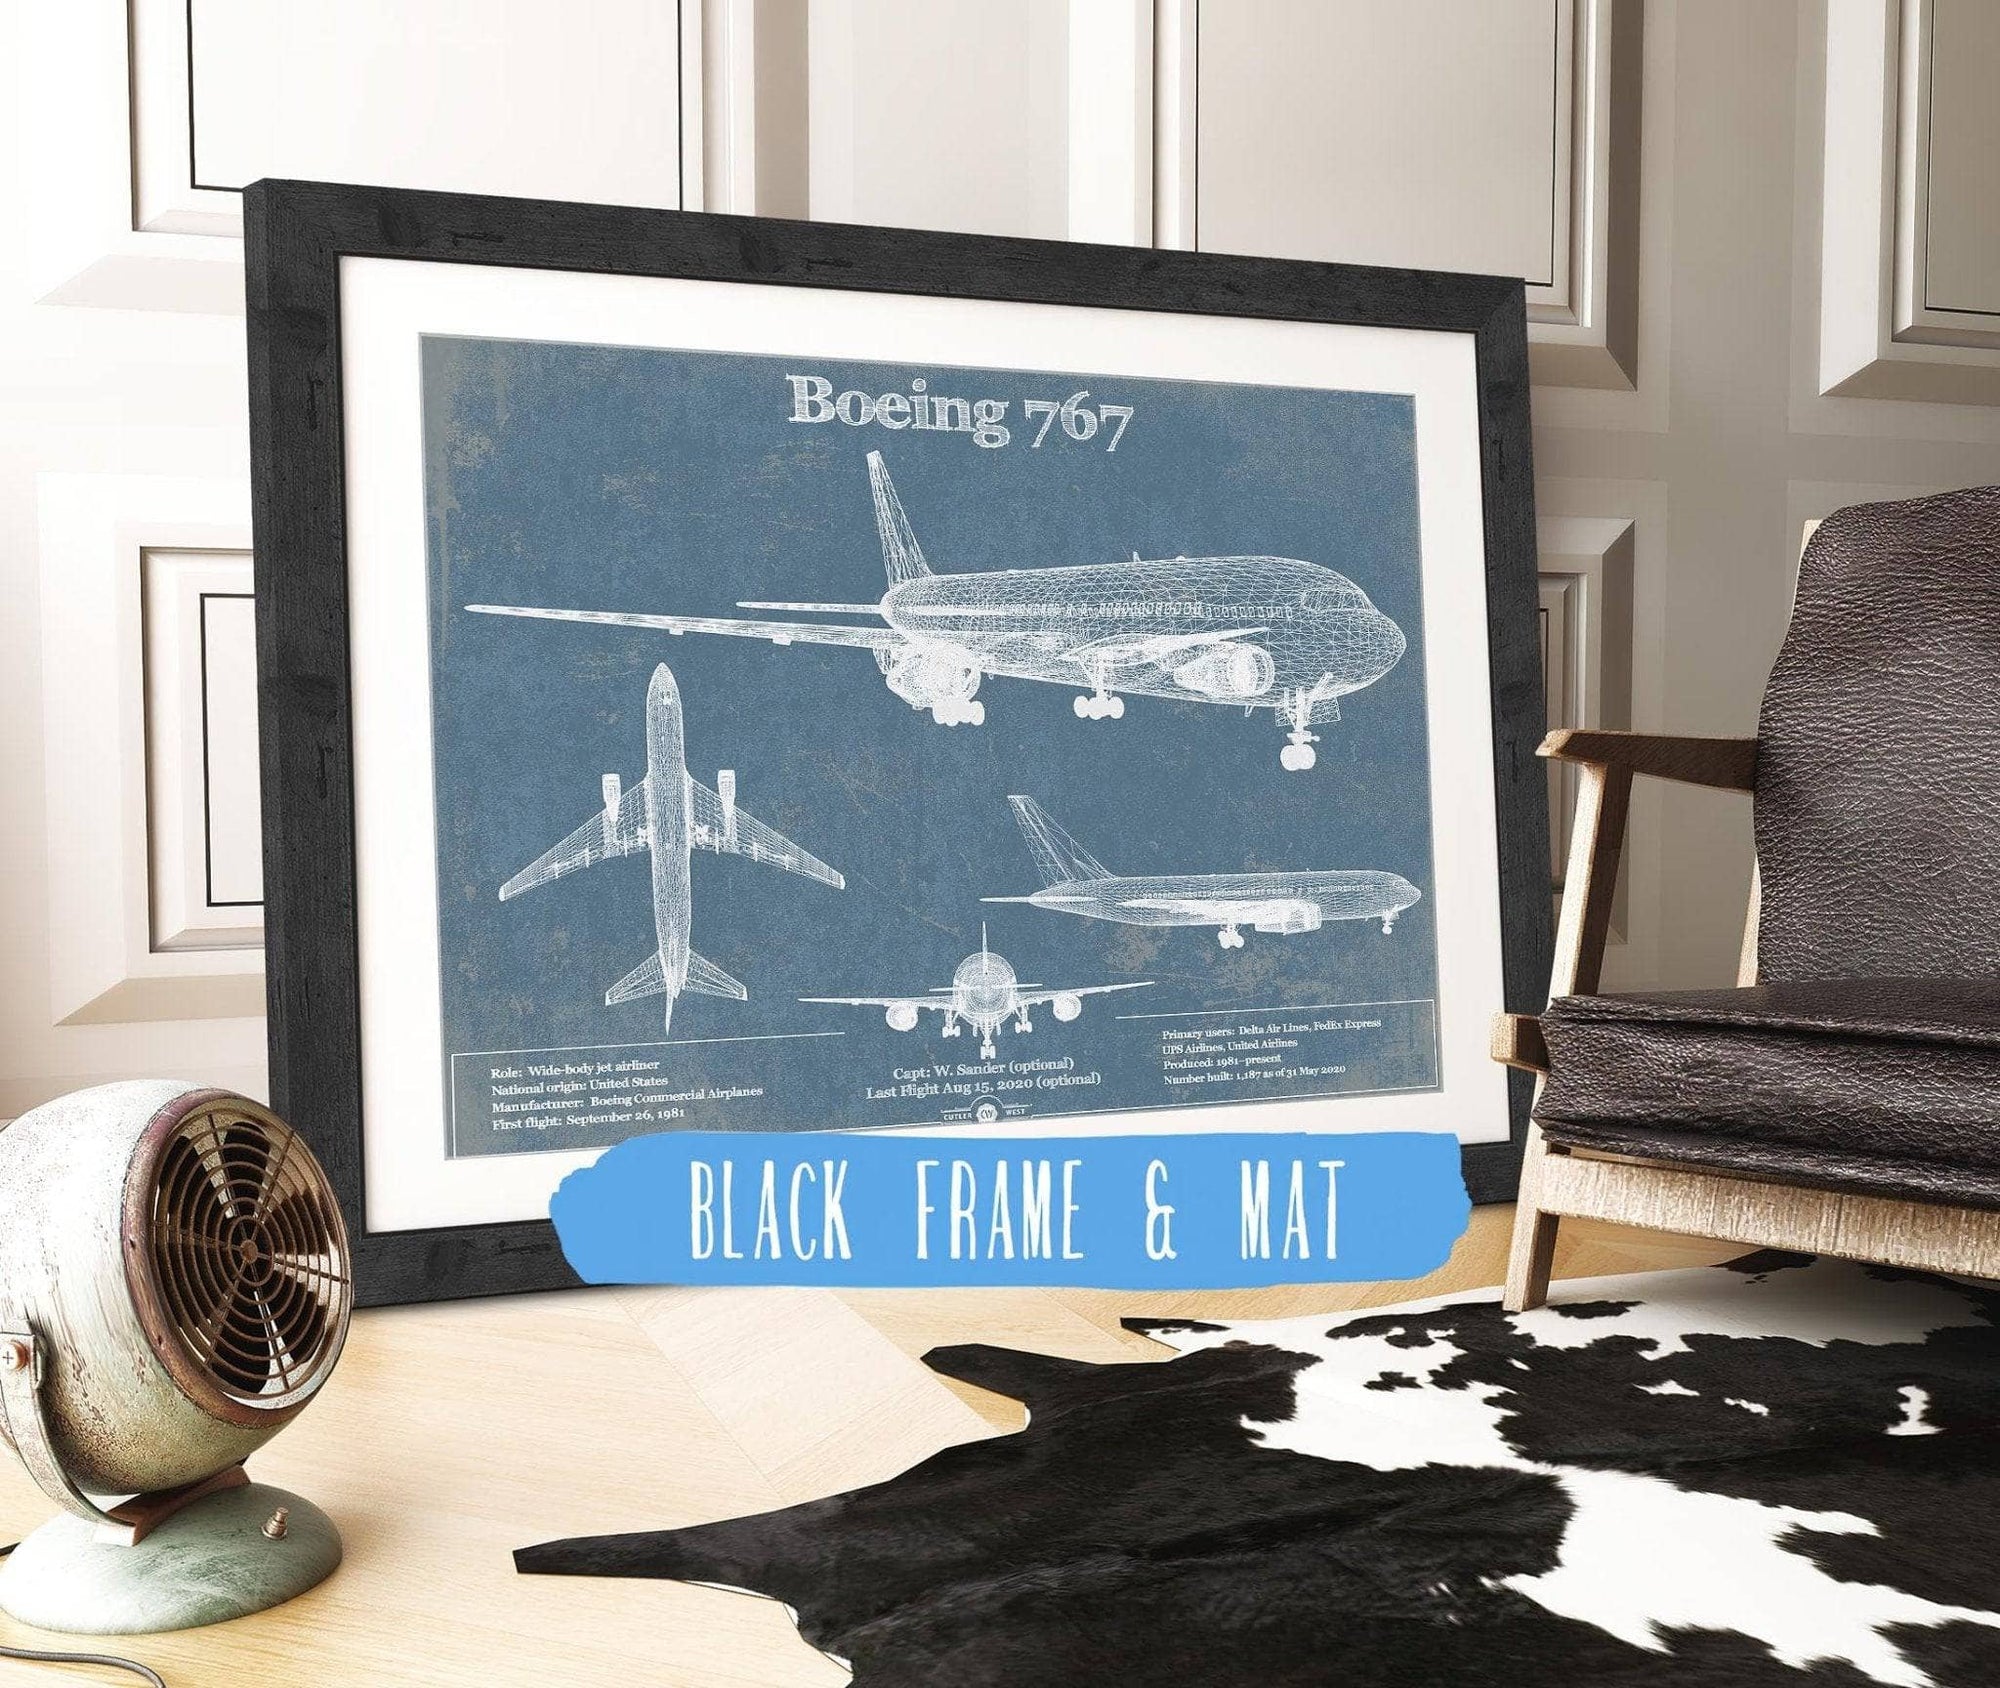 Cutler West Boeing Collection 14" x 11" / Black Frame & Mat Boeing 767 Vintage Aviation Blueprint Print - Custom Pilot Name Can Be Added 835000103_51313